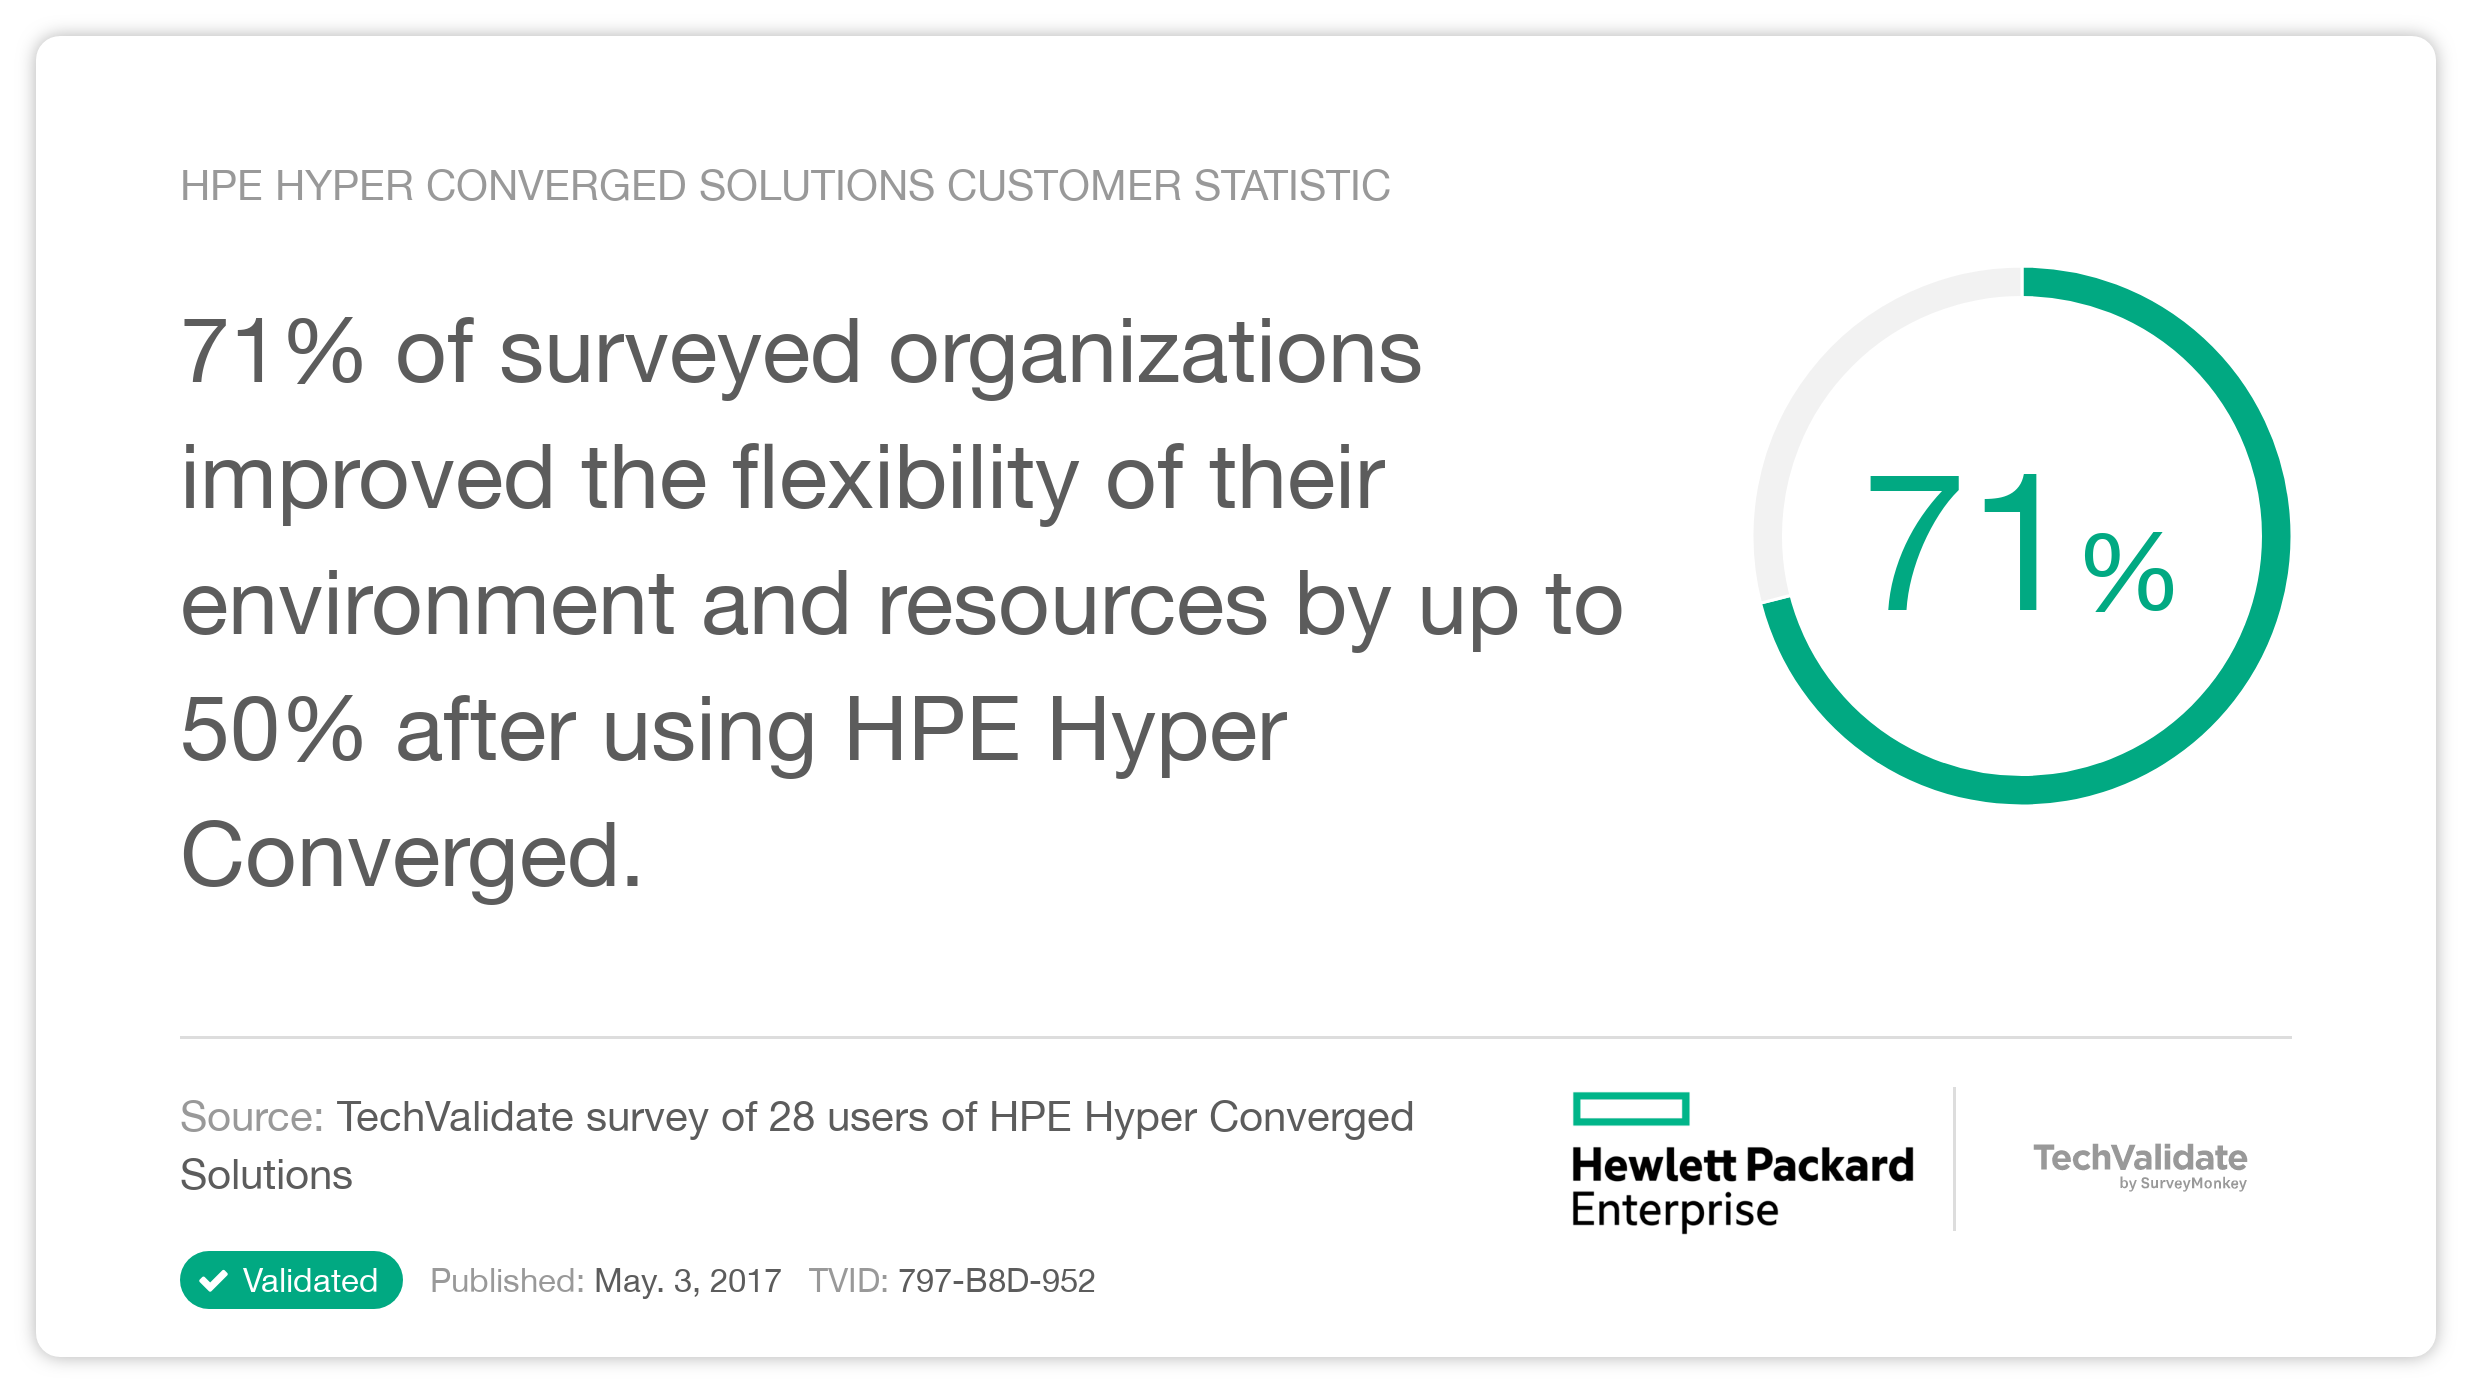 HPE Hyper Converged Solutions Customer Statistic